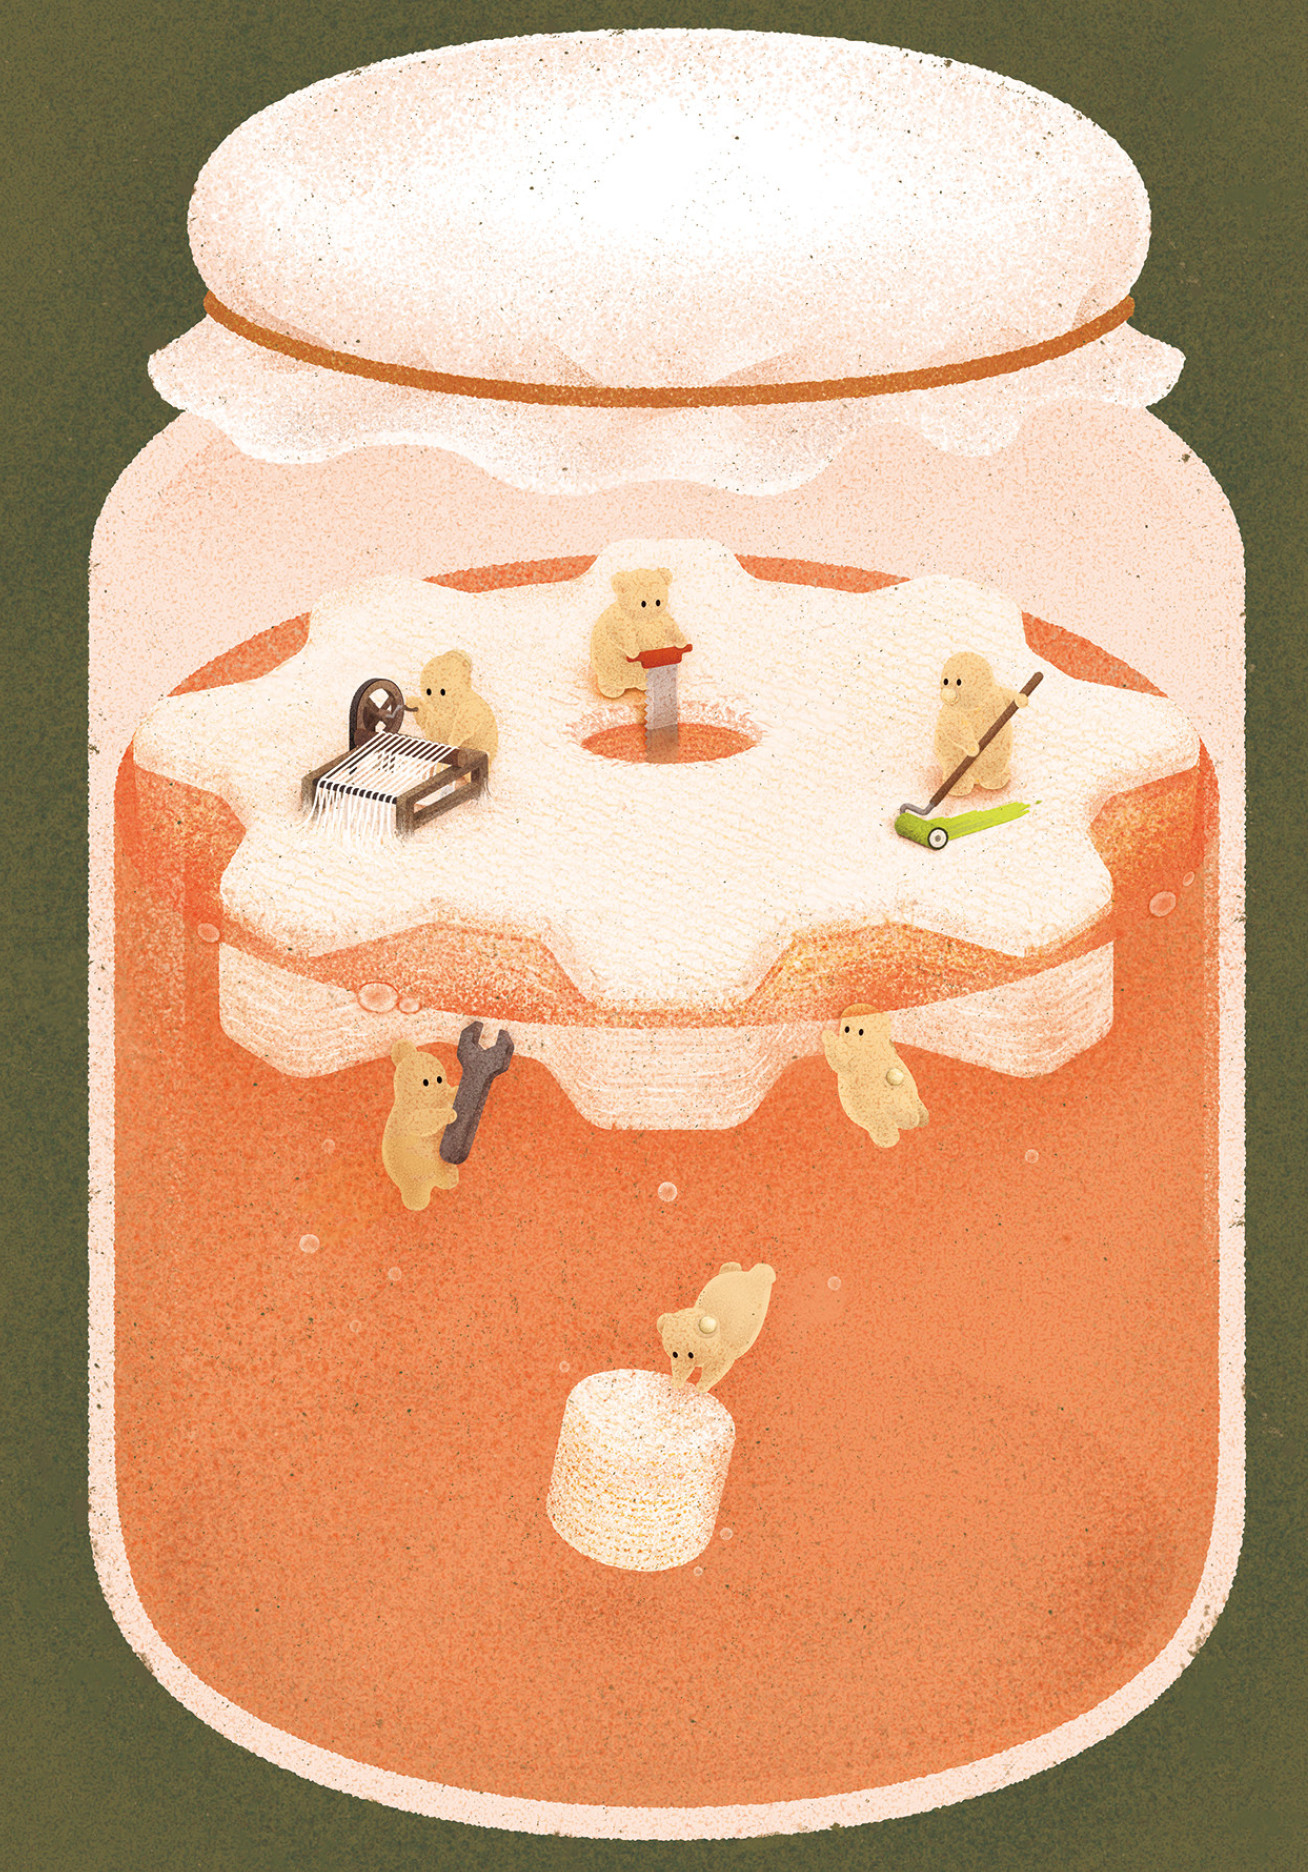 Drawing of a jar with orange liquid. The ELMs are depicted as tiny animals doing odd jobs like spinning fabric and wielding a spanner